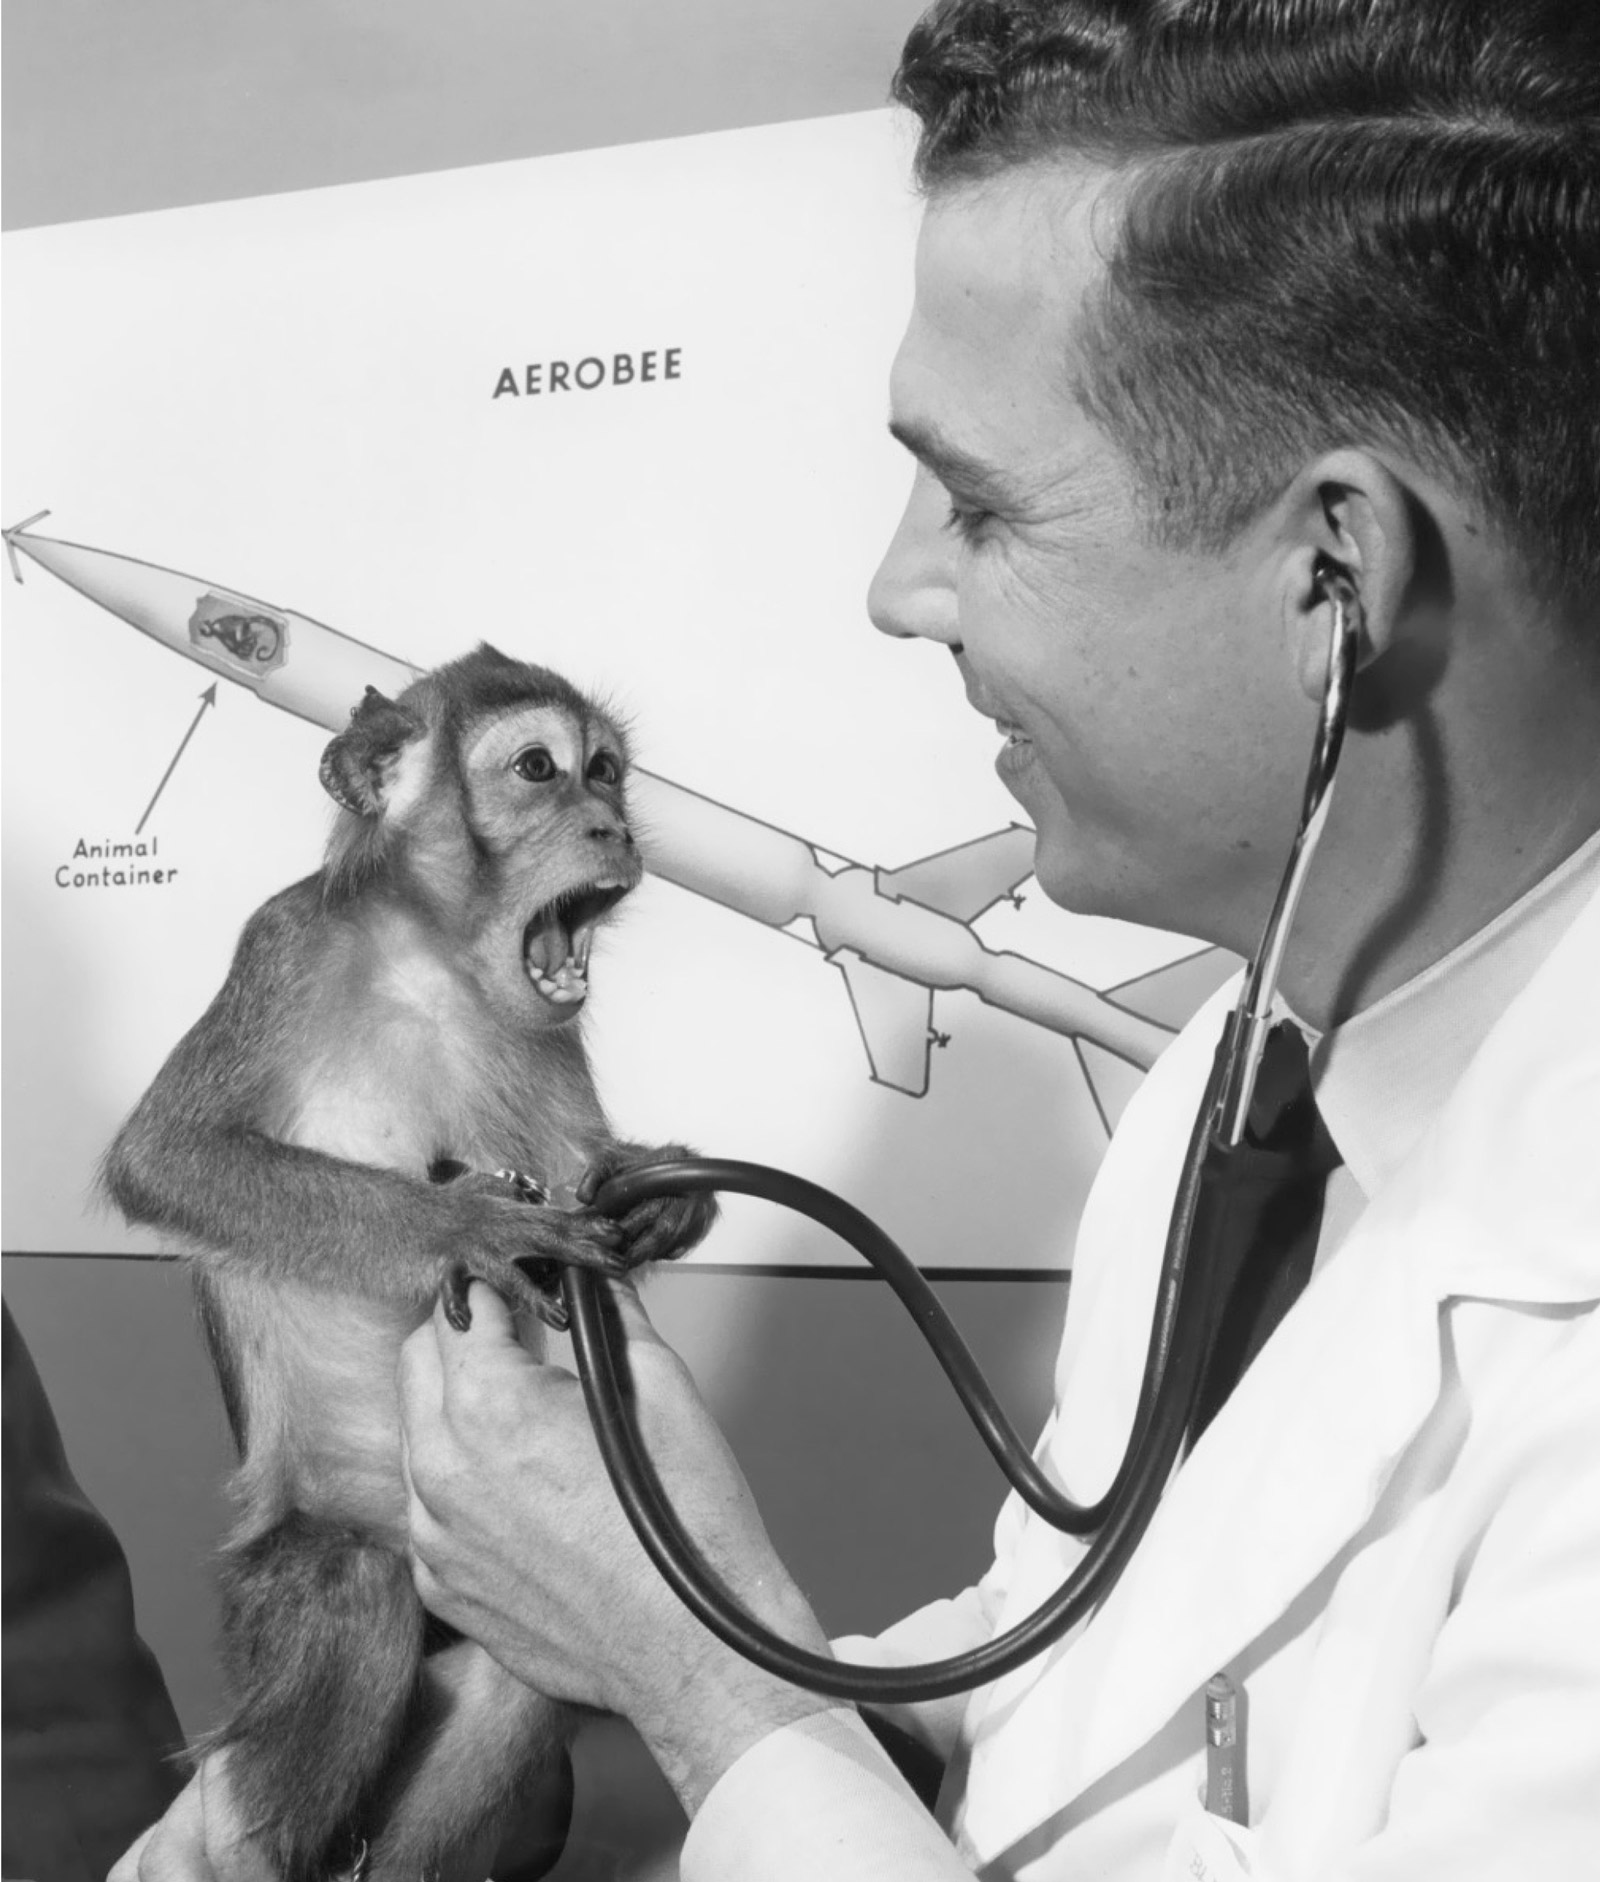 A photograph of a physician examining macaque monkey Michael after his May 1952 flight on the Aerobee carrier rocket.